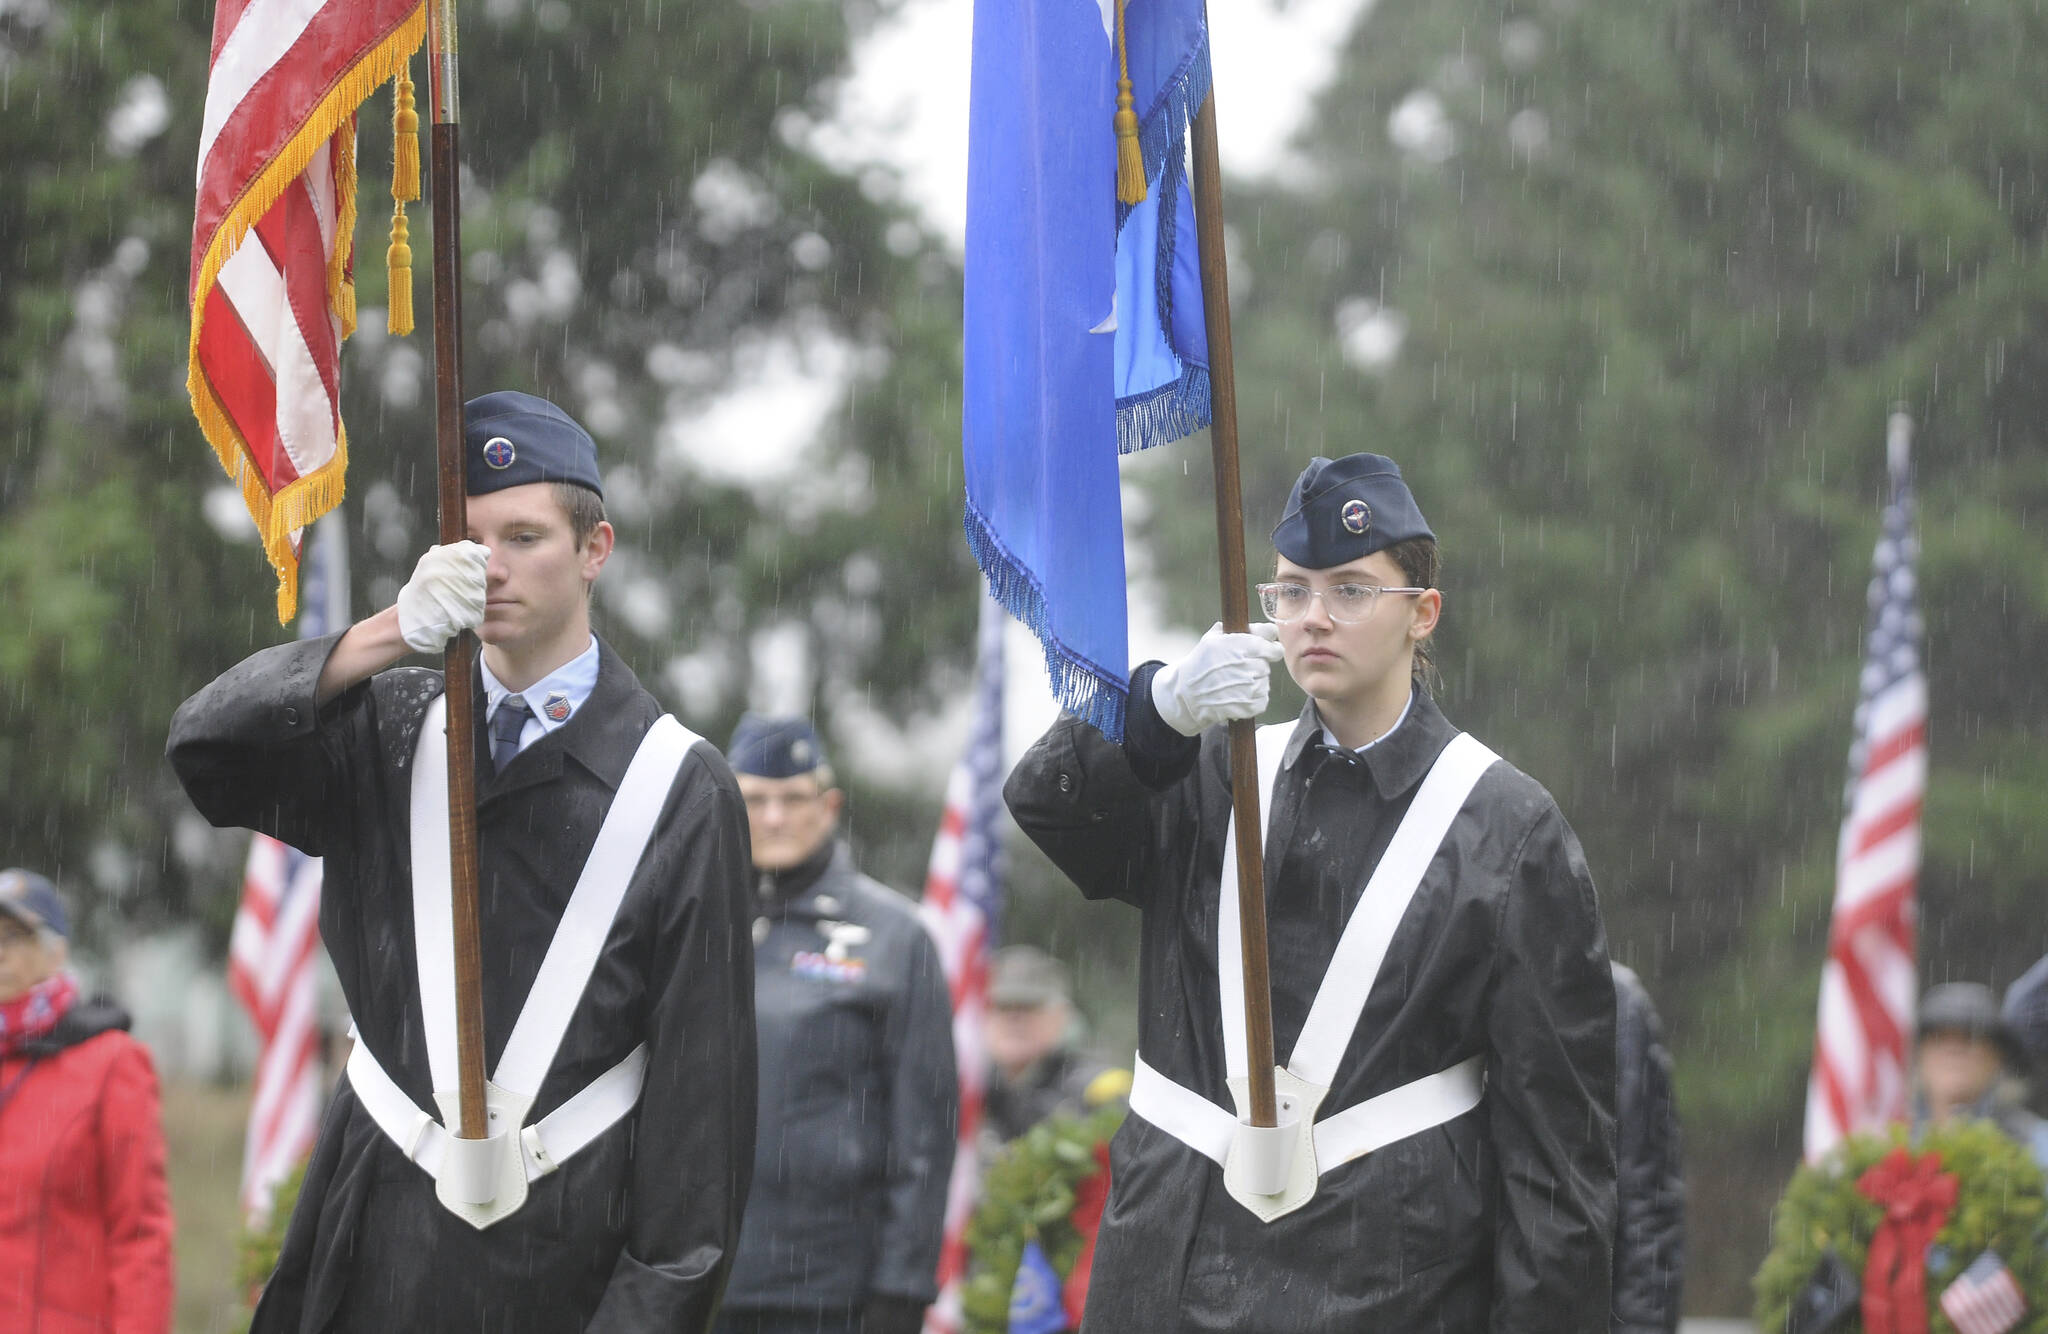 Jackson Imholt and Faith Amaya of the Civil Air Patrol-Dungeness Composite Flight present colors at the Wreaths Across America ceremony in Sequim Saturday morning. Sequim Gazette photo by Michael Dashiell